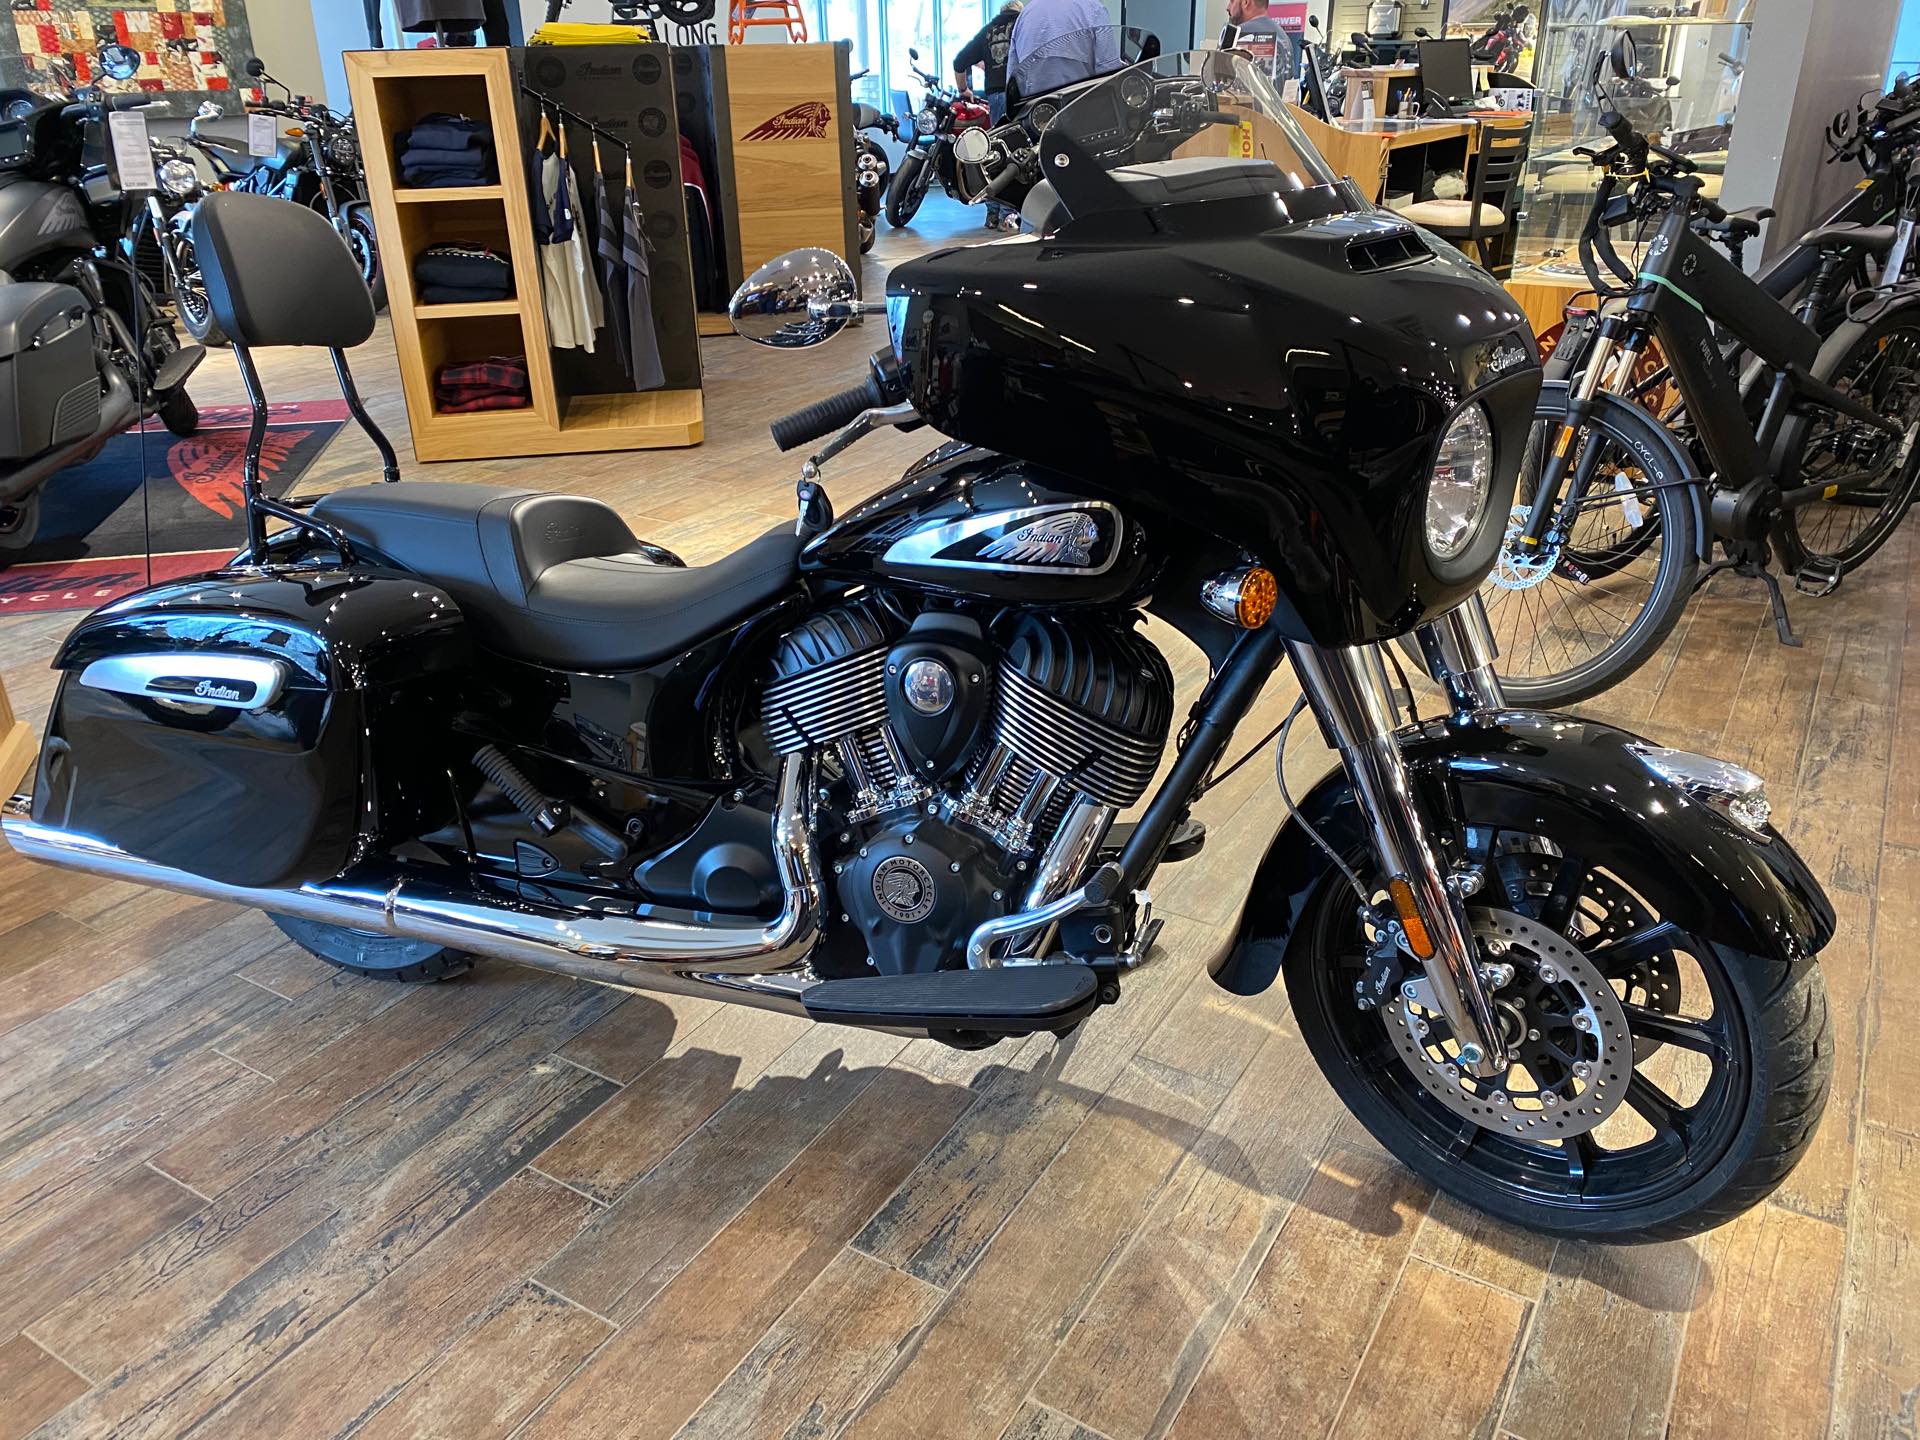 2020 Indian Chieftain Chieftain at Pitt Cycles